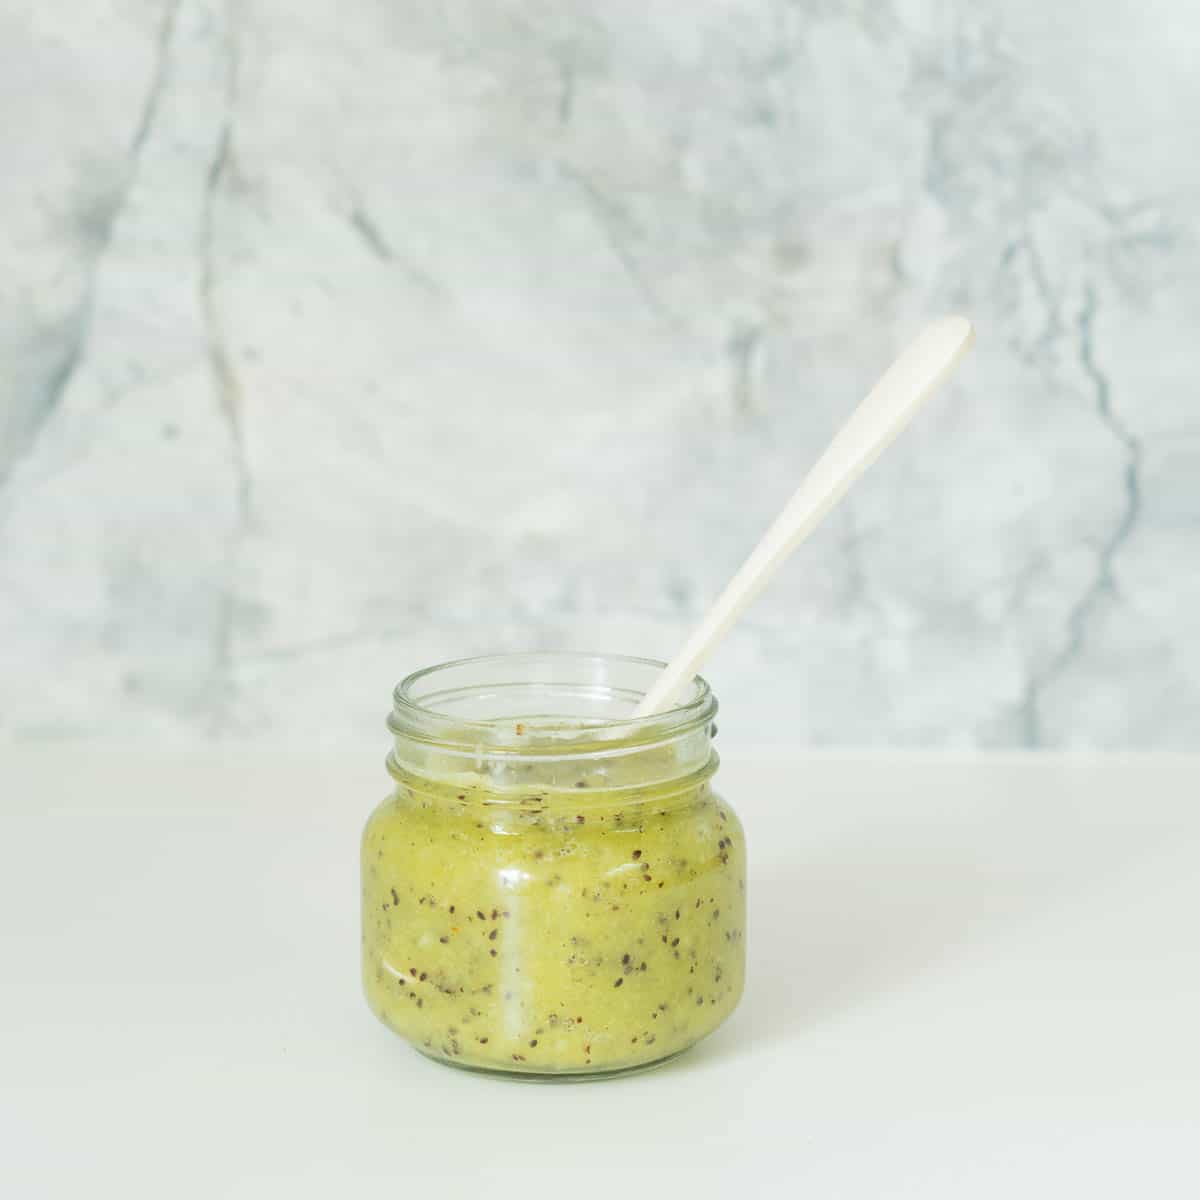 A small glass jar filled with kiwifruit puree in front of a grey marble splashback.